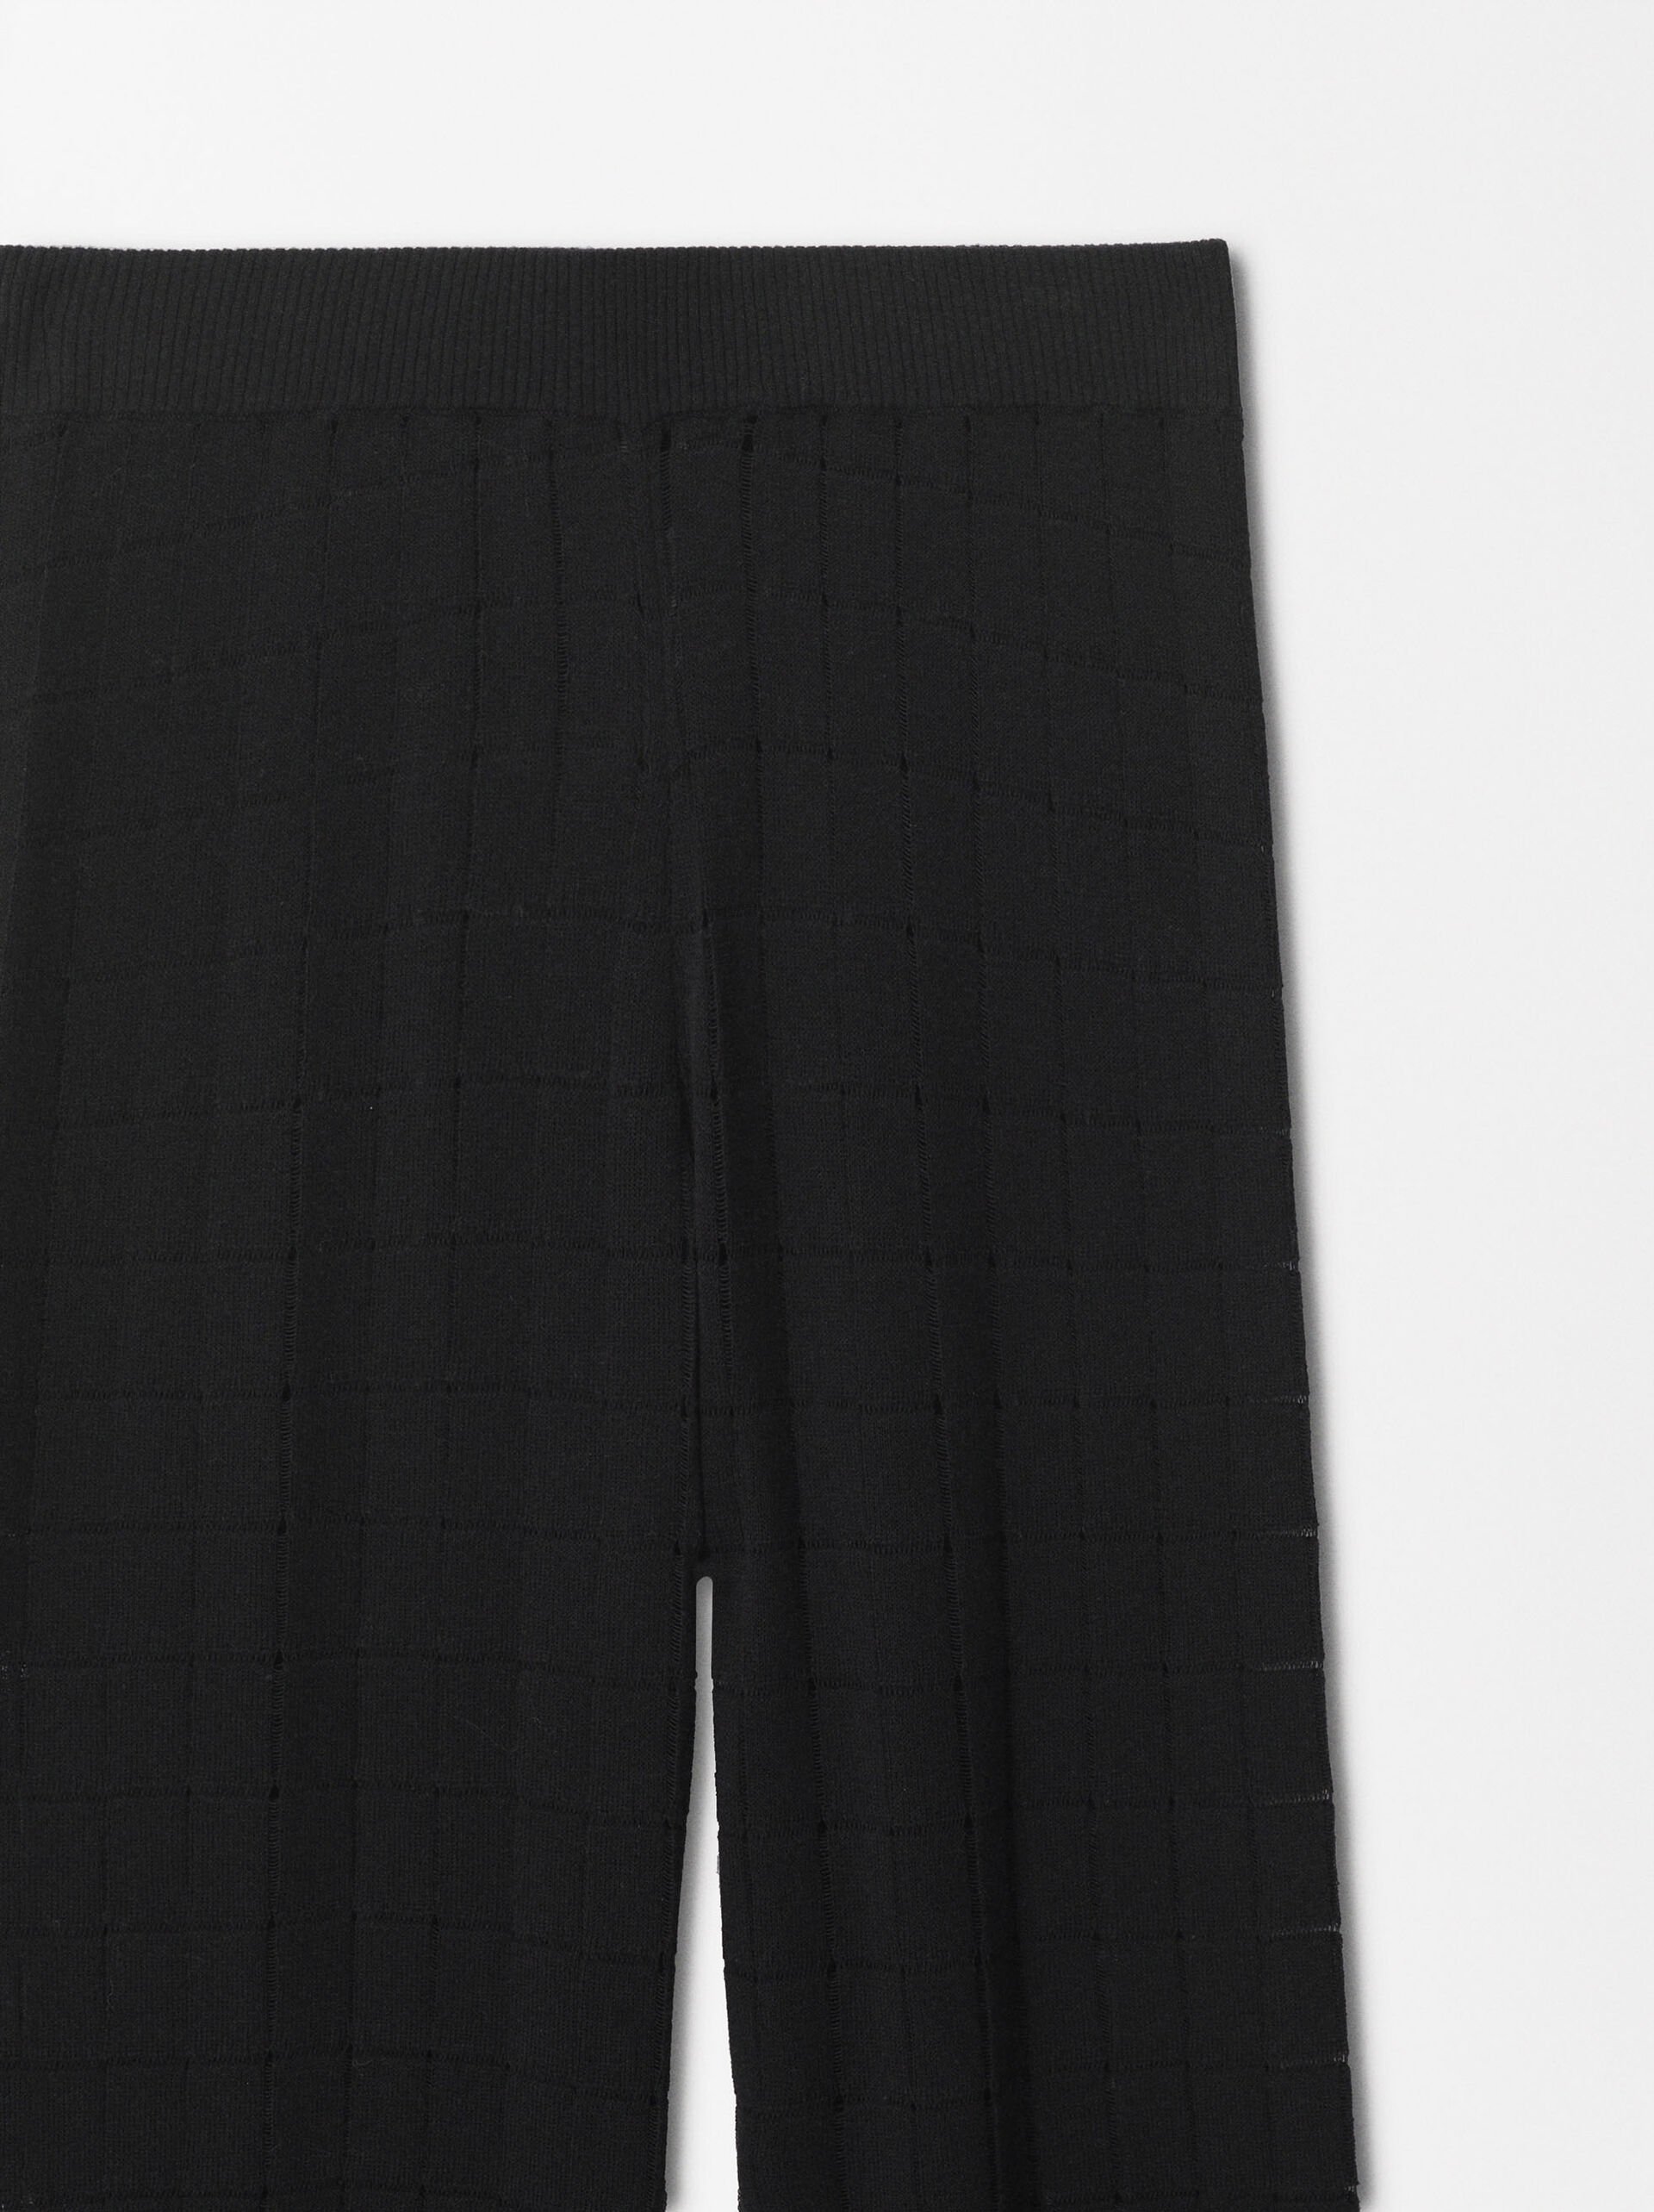 Pointelle Knit Trousers